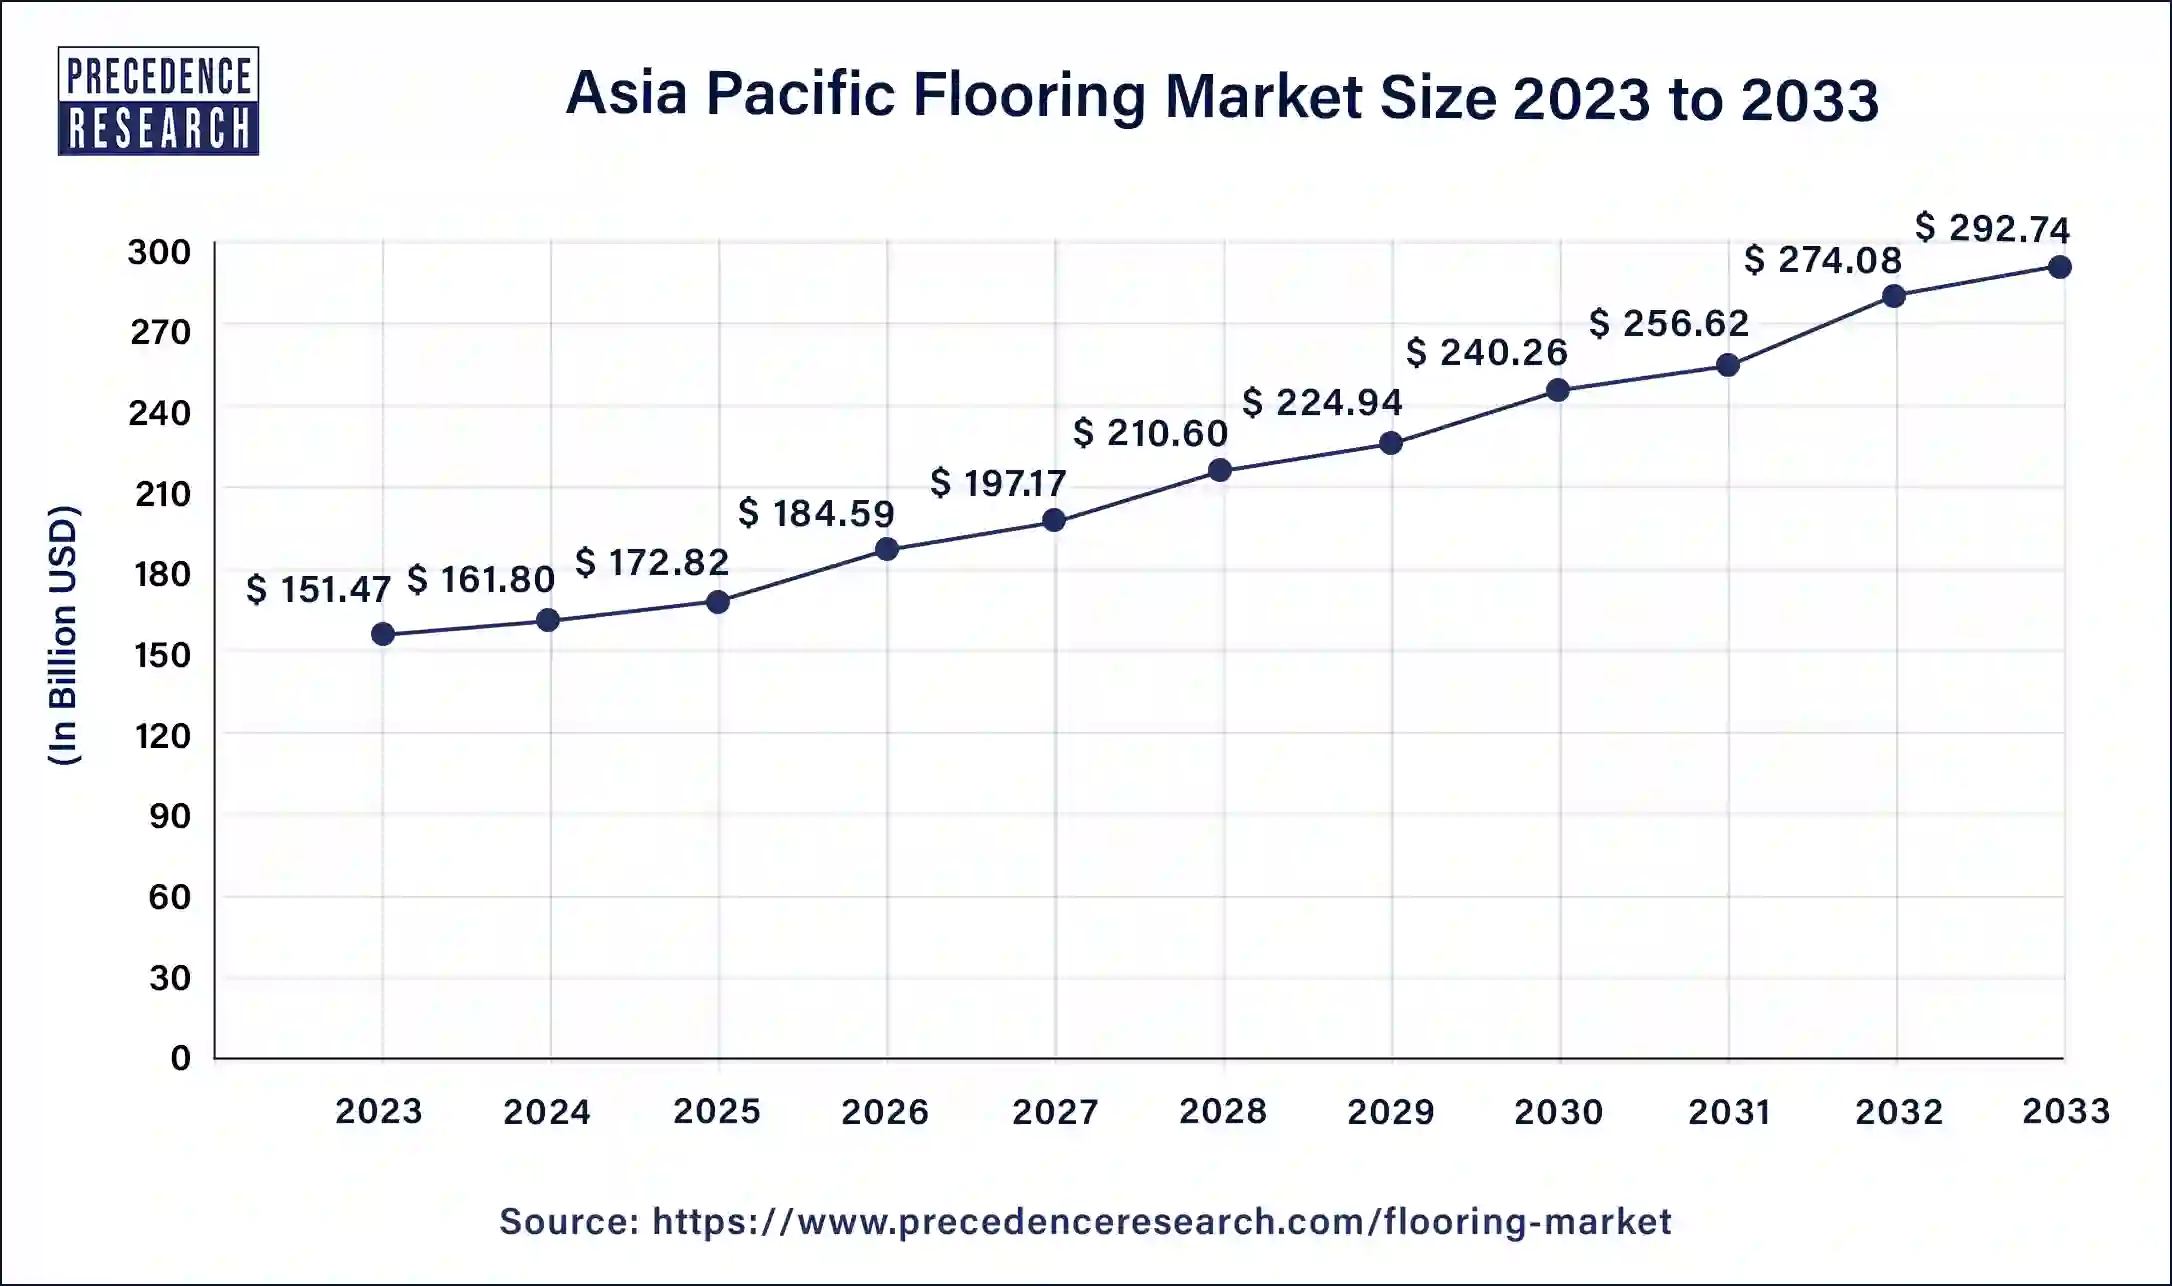 Asia Pacific Flooring Market Size 2024 to 2033